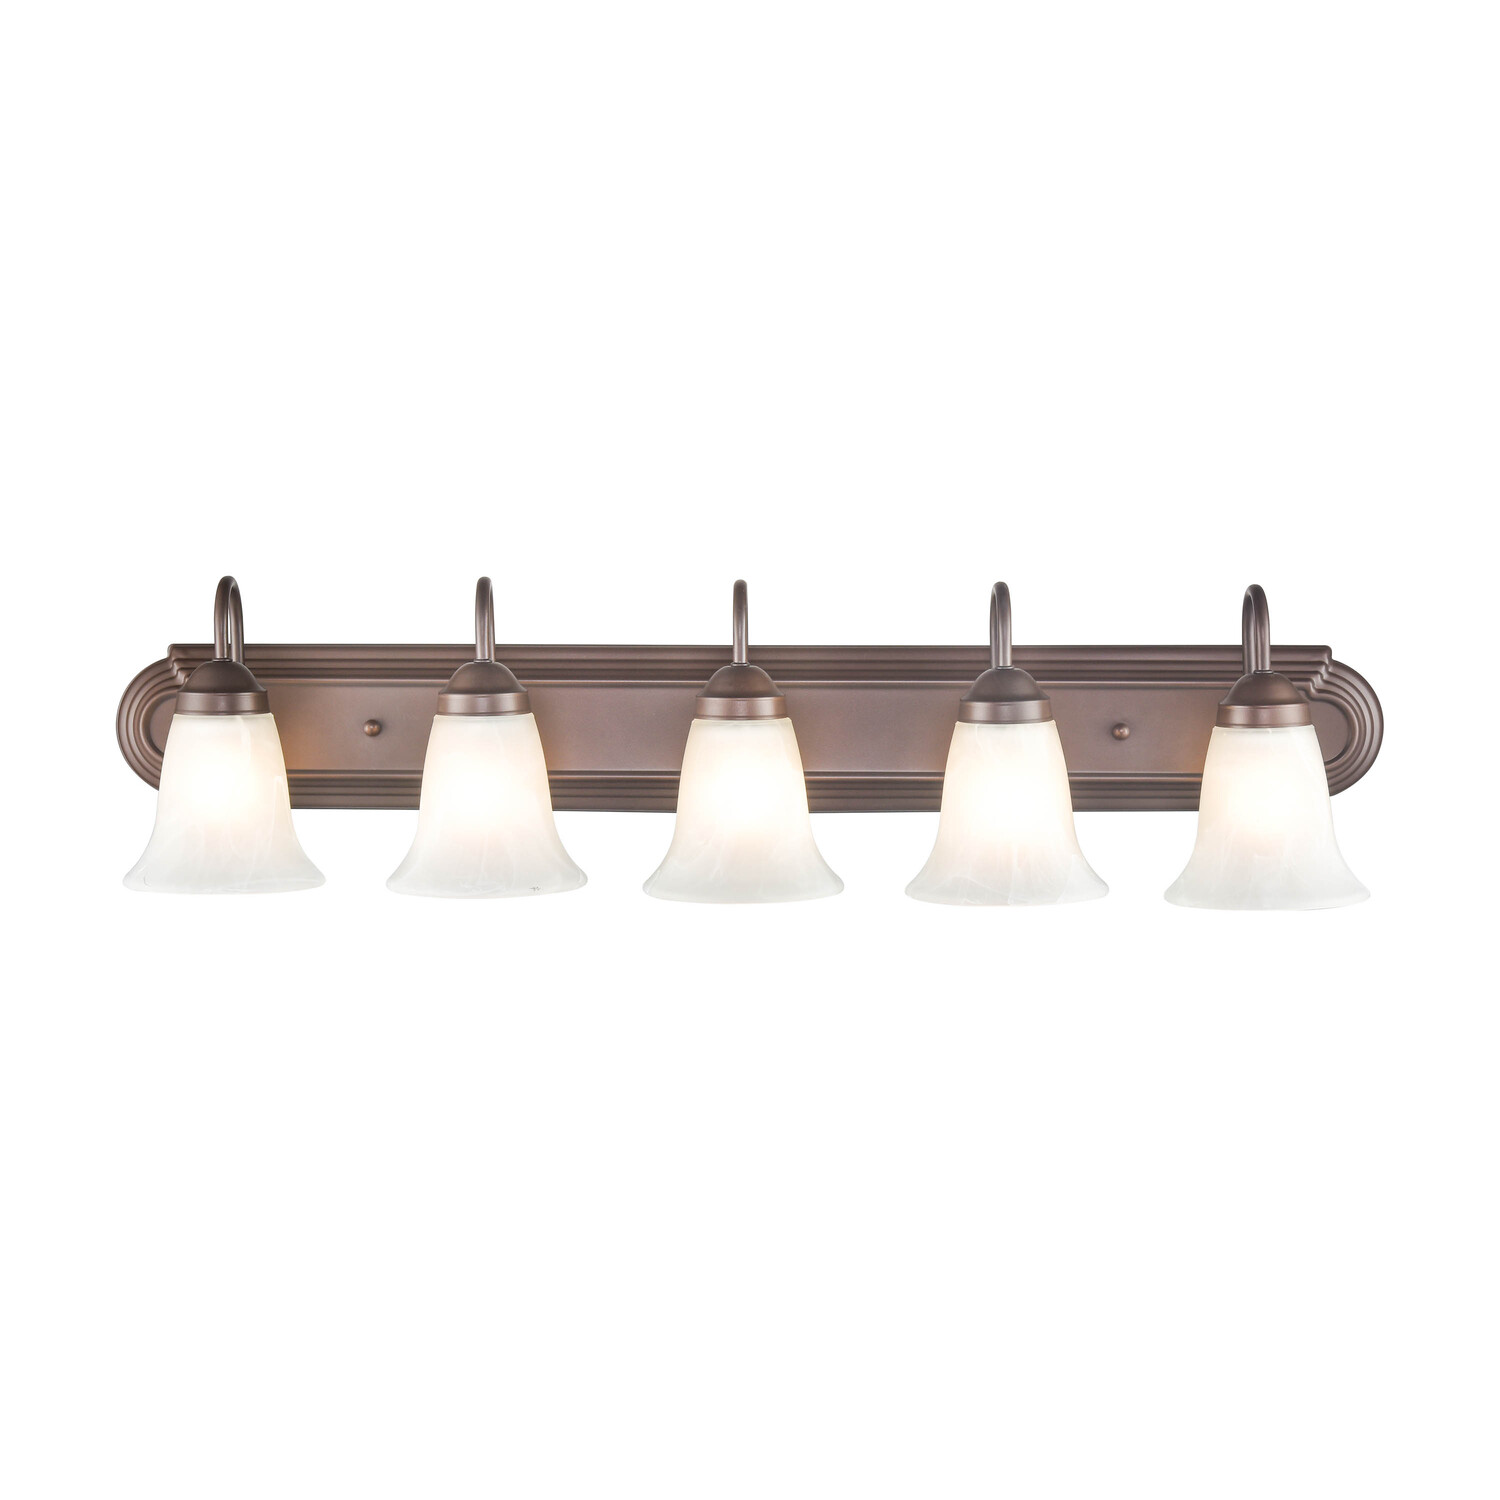 4285-BZ-Millennium Lighting-5 Light Bath Vanity-8.5 Inches Tall and 36 Inches Wide-Bronze Finish - image 4 of 6